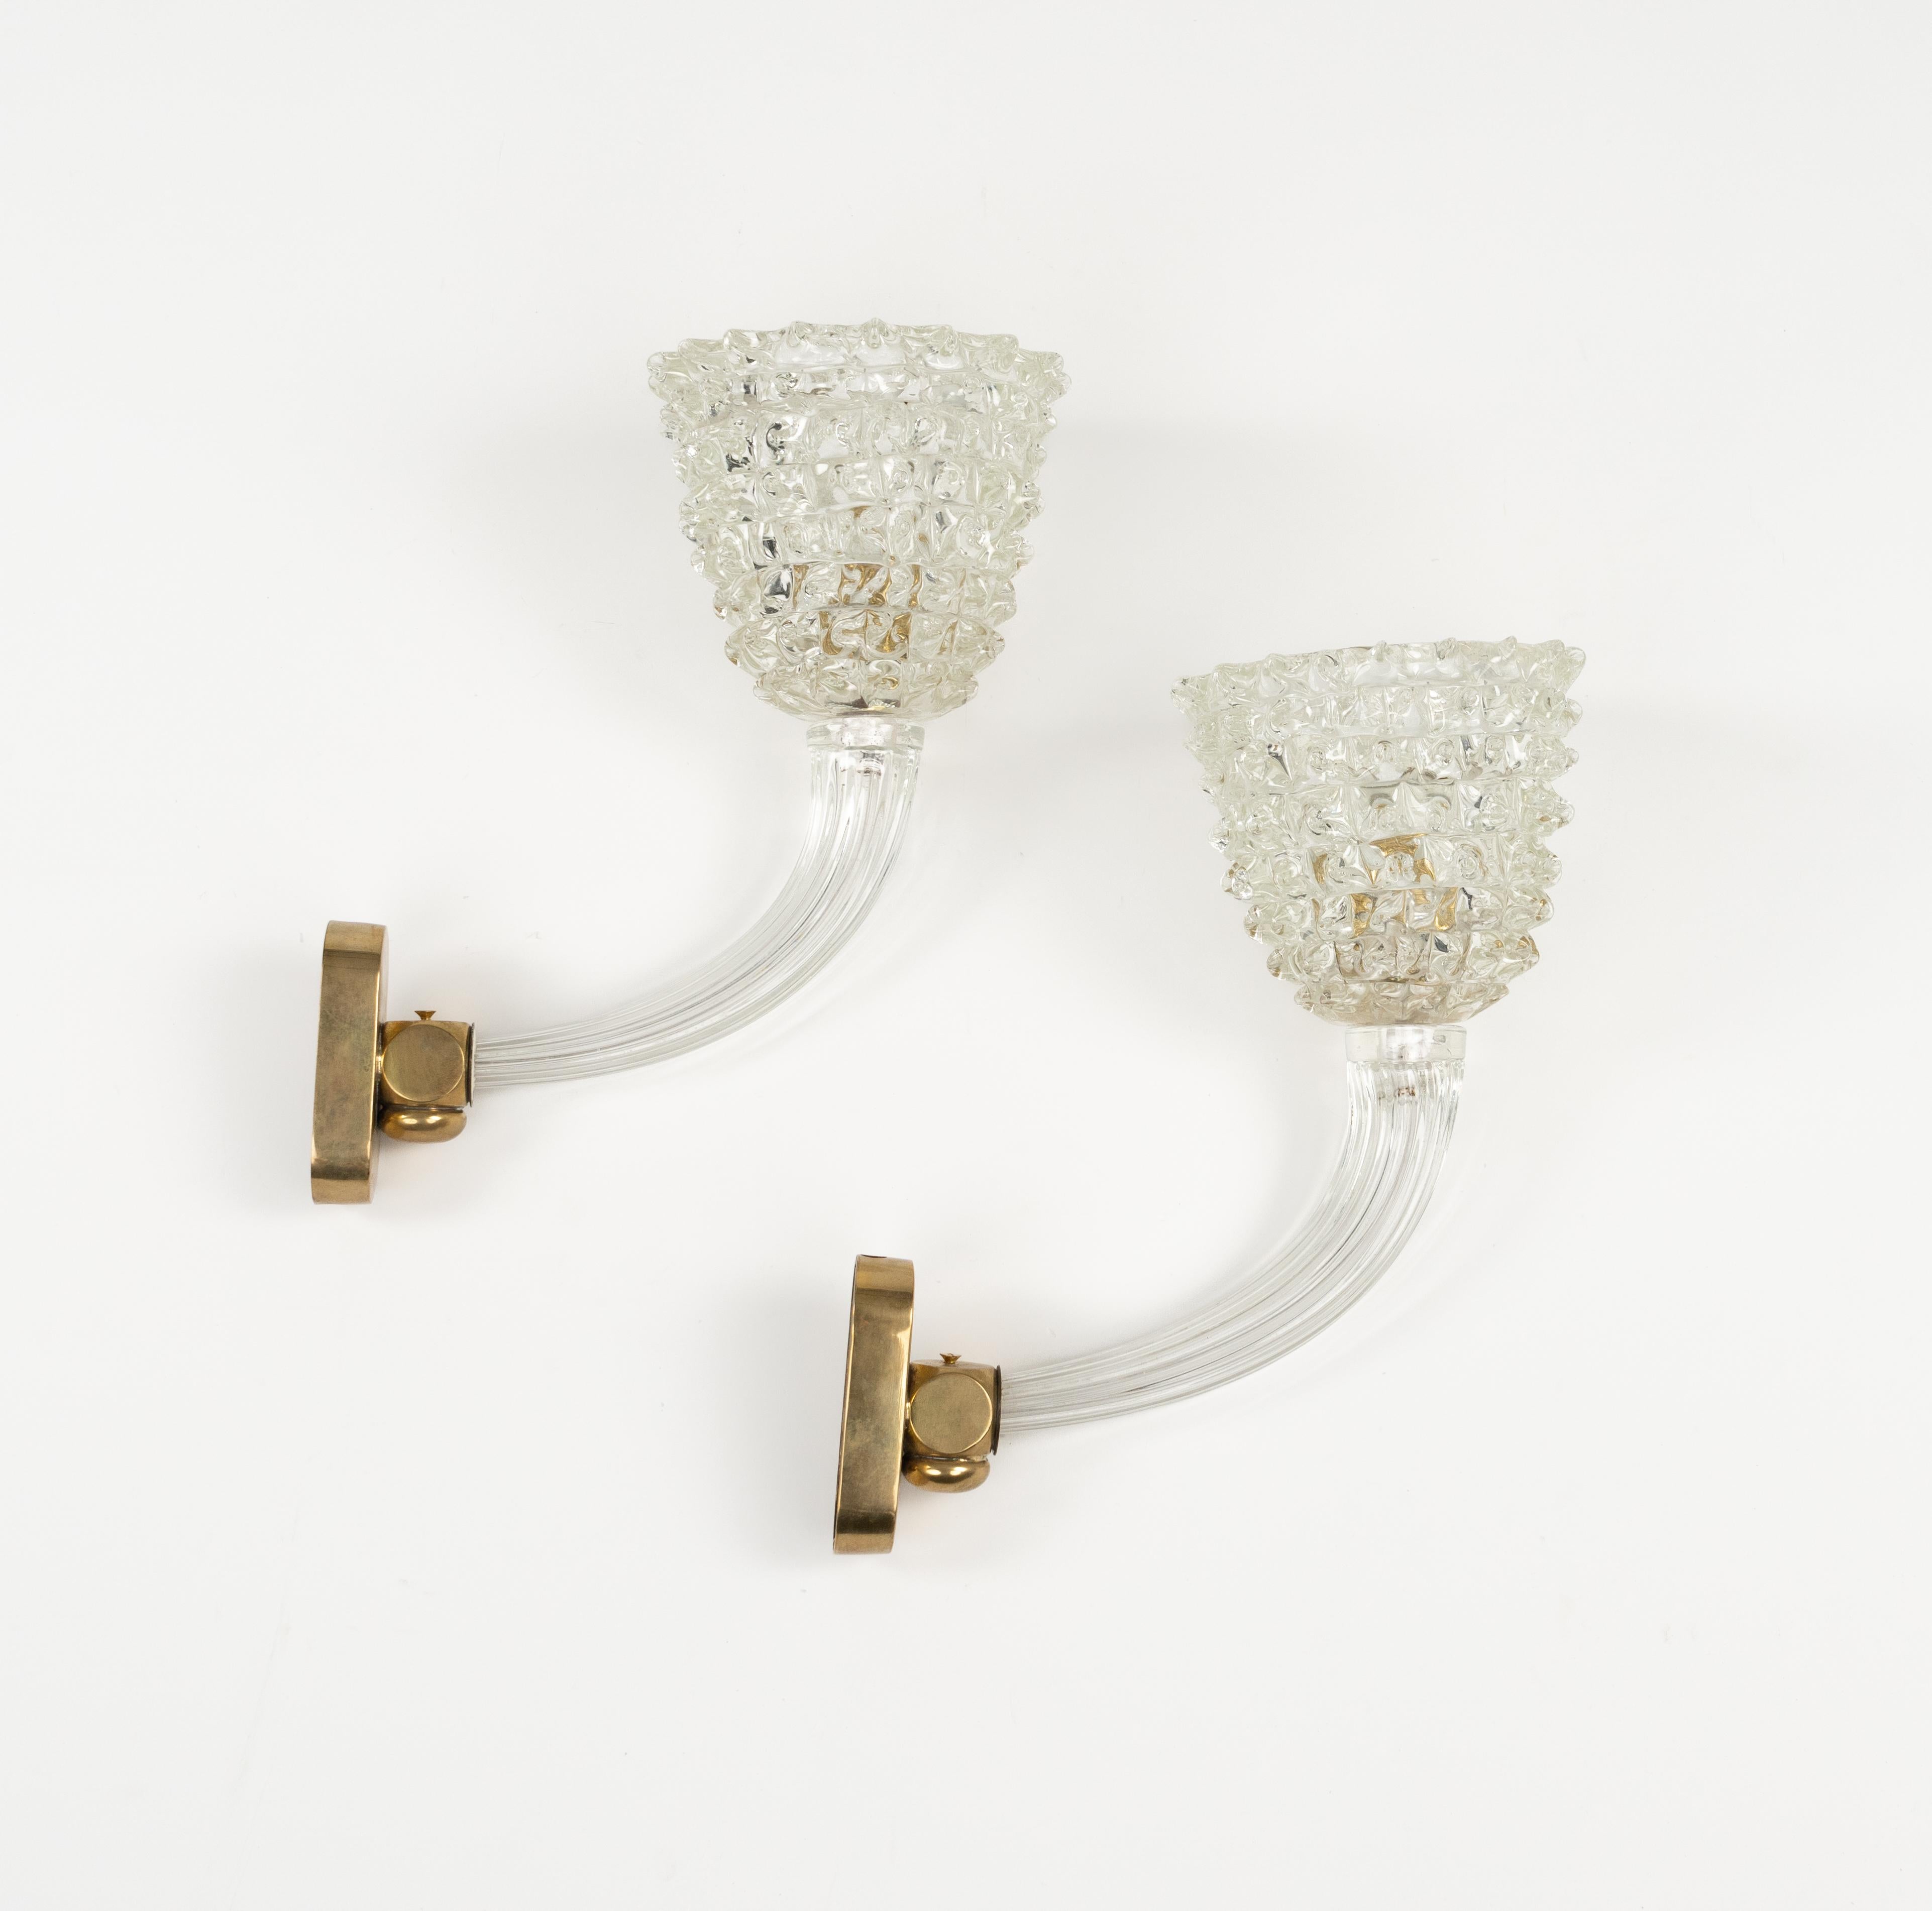 Metal Pair of Sconces Rostrato Murano Glass & Brass Barovier & Toso Style, Italy 1950s For Sale